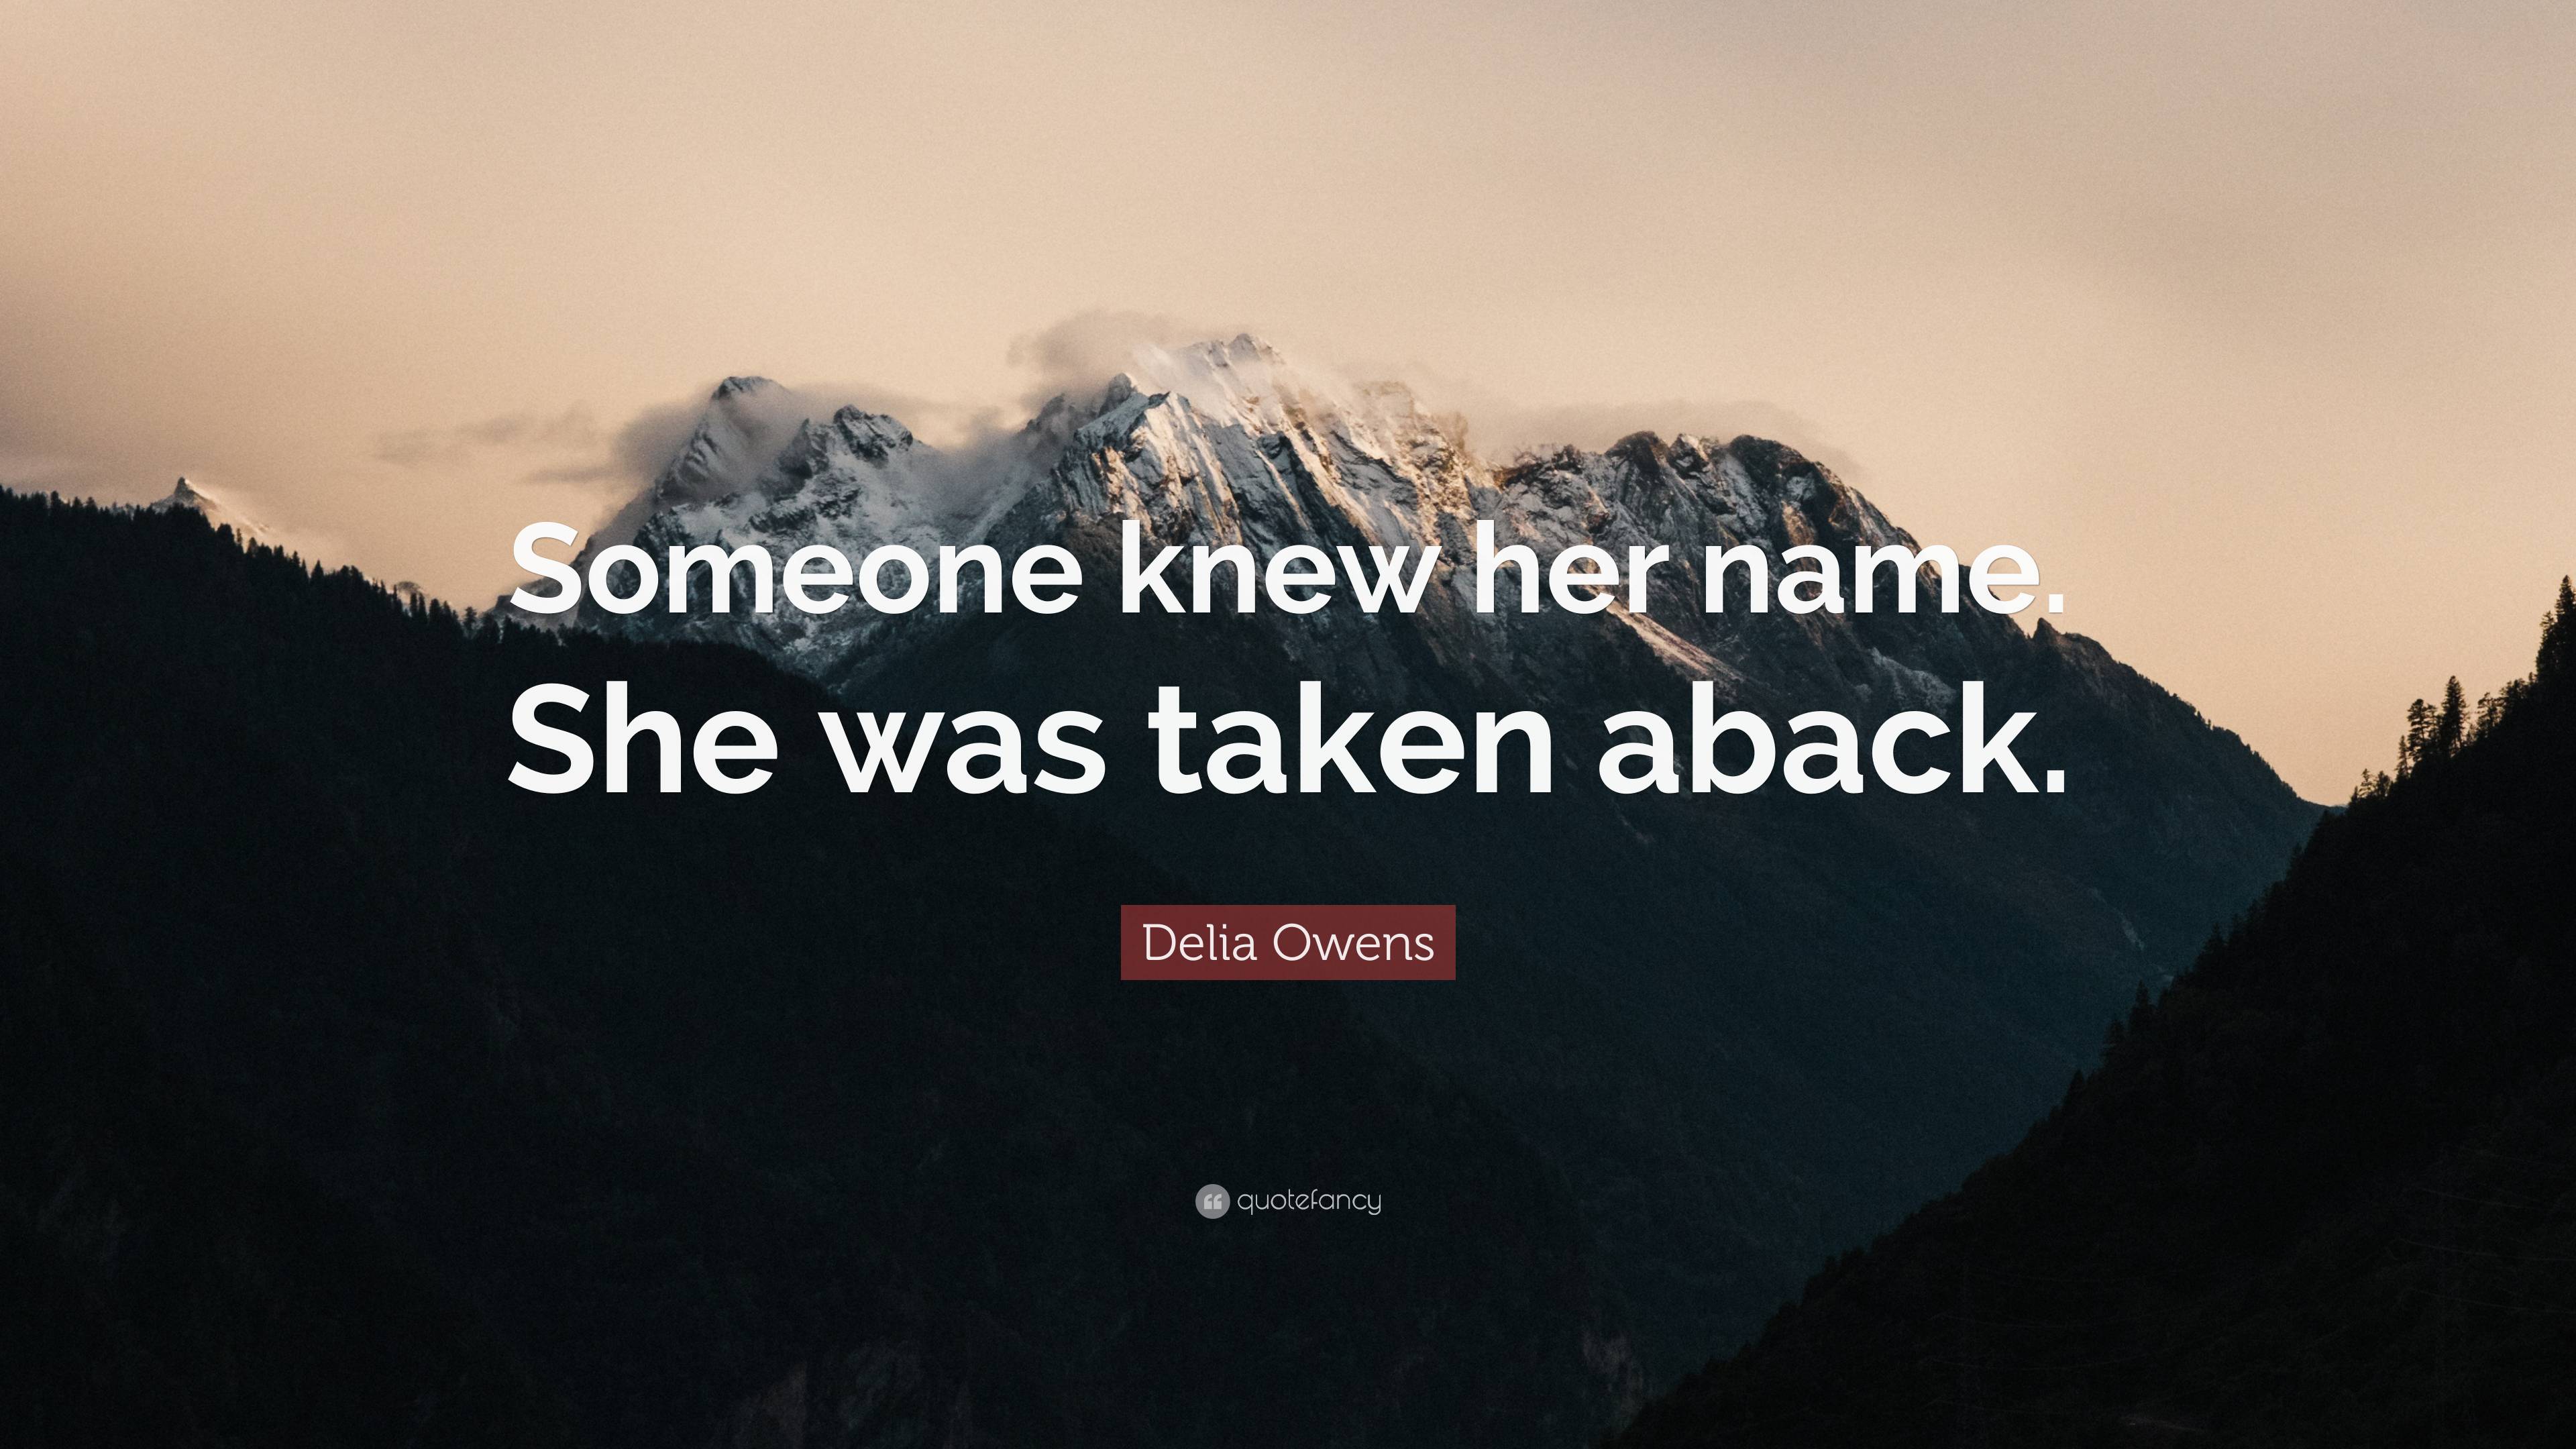 Delia Owens Quote: “Someone knew her name. She was taken aback.”